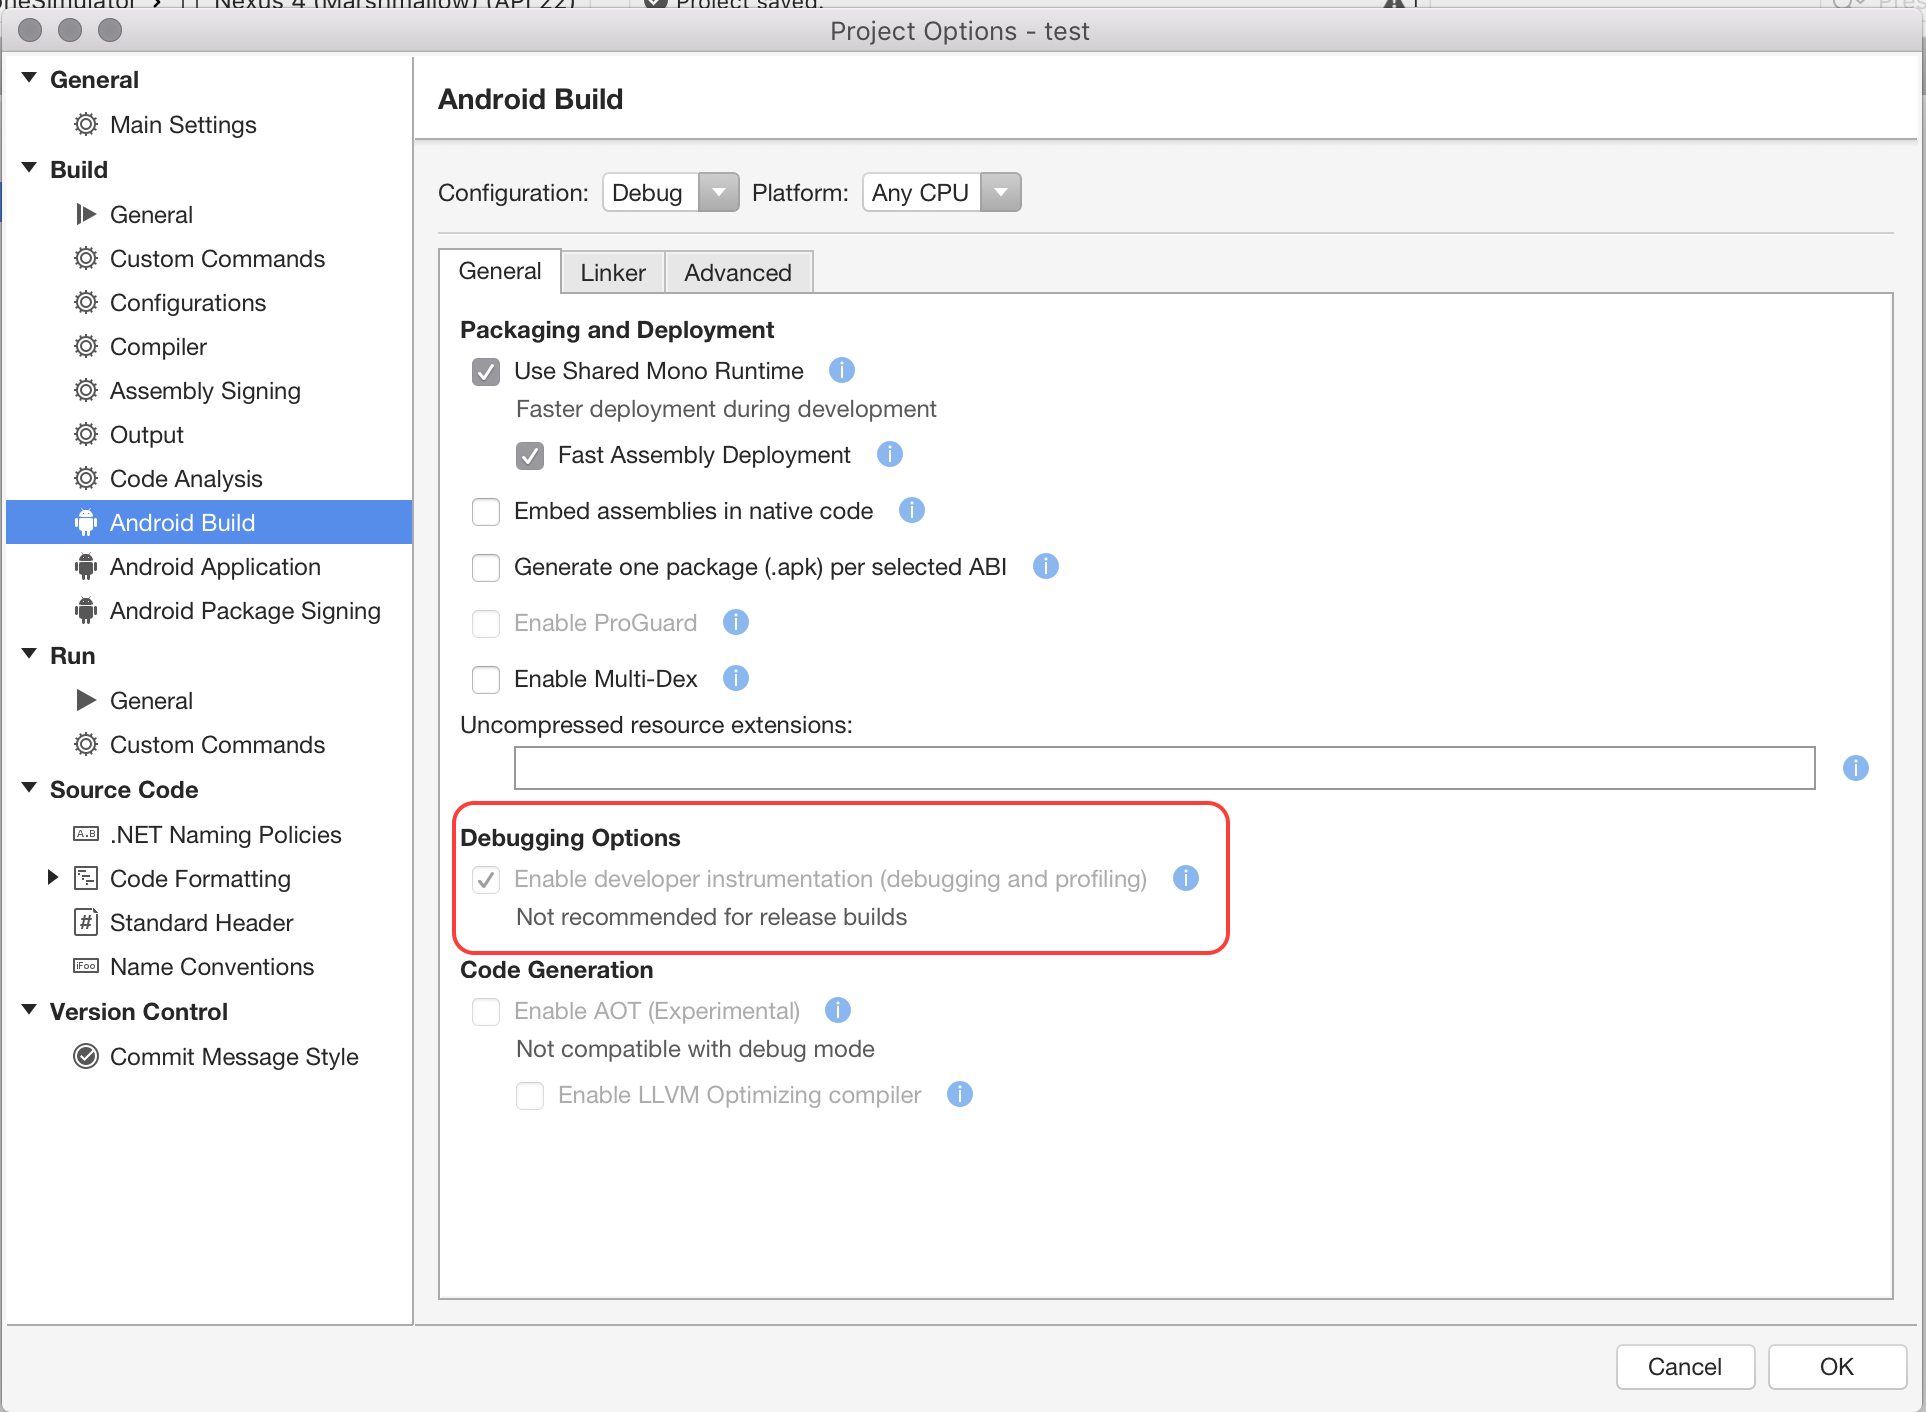 Android Options Dialog in Visual Studio for Mac